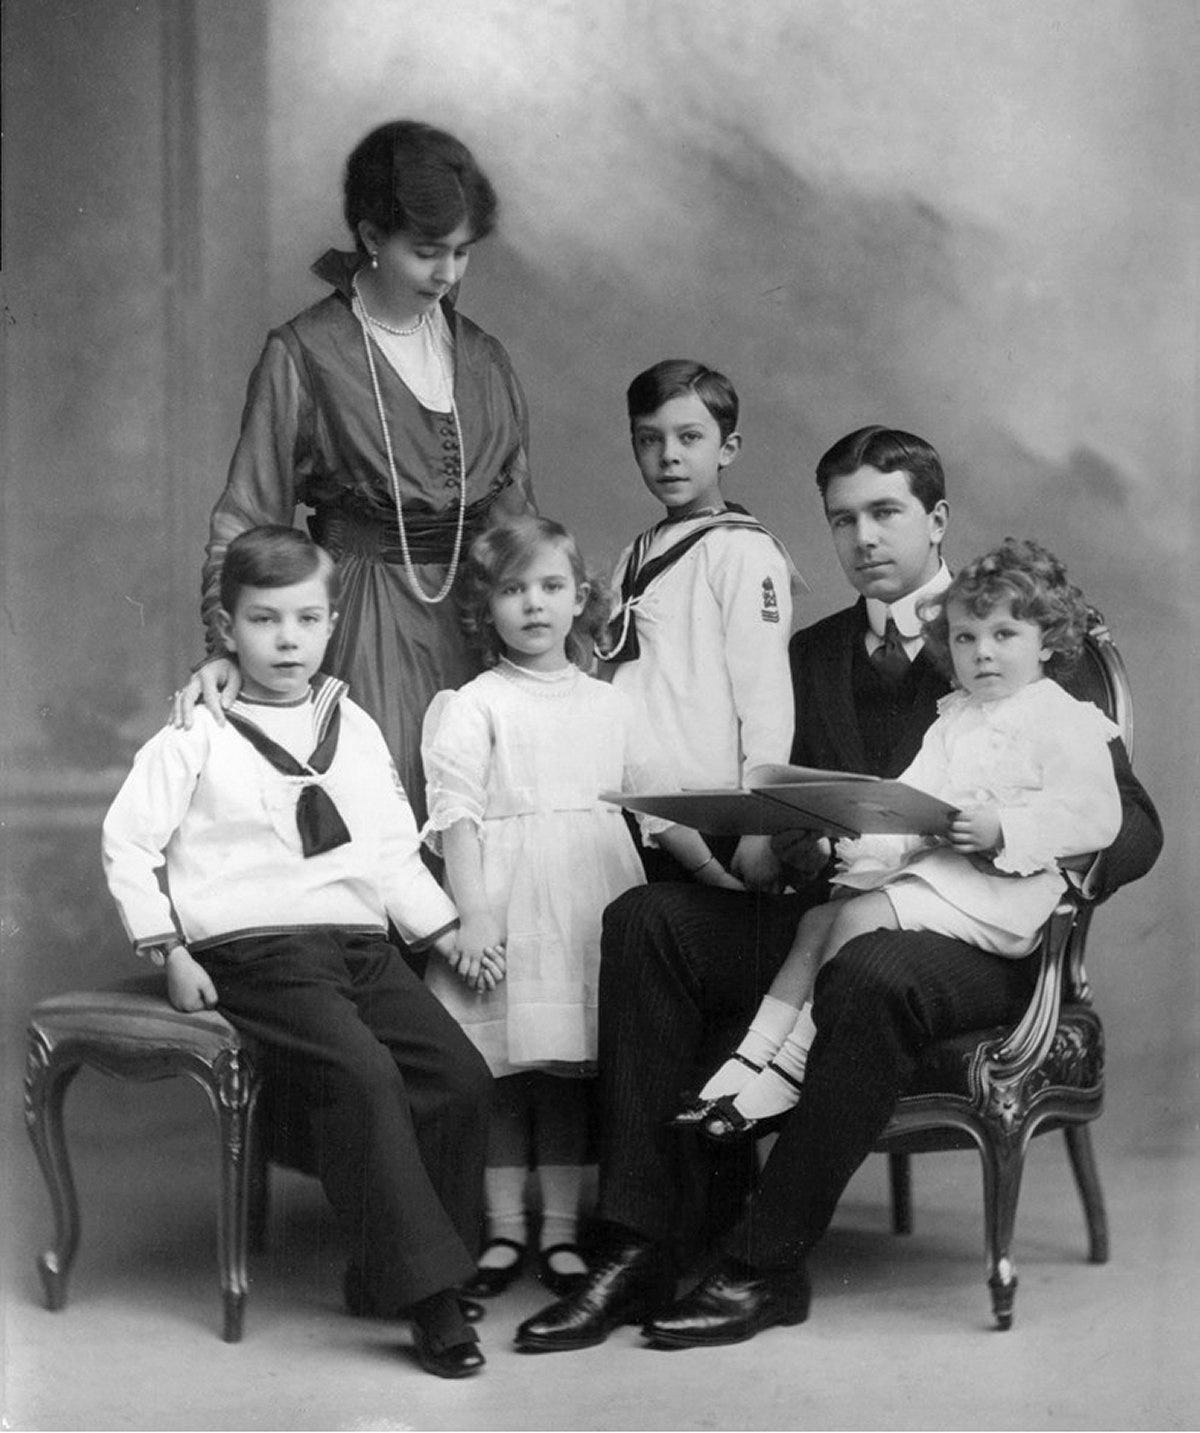 Crown Prince Gustaf and Crown Princess Margaret of Sweden with their four eldest children, Prince Gustaf Adolf, Prince Sigvard, Princess Ingrid, and Prince Bertil, ca. 1915 (Wikimedia Commons)